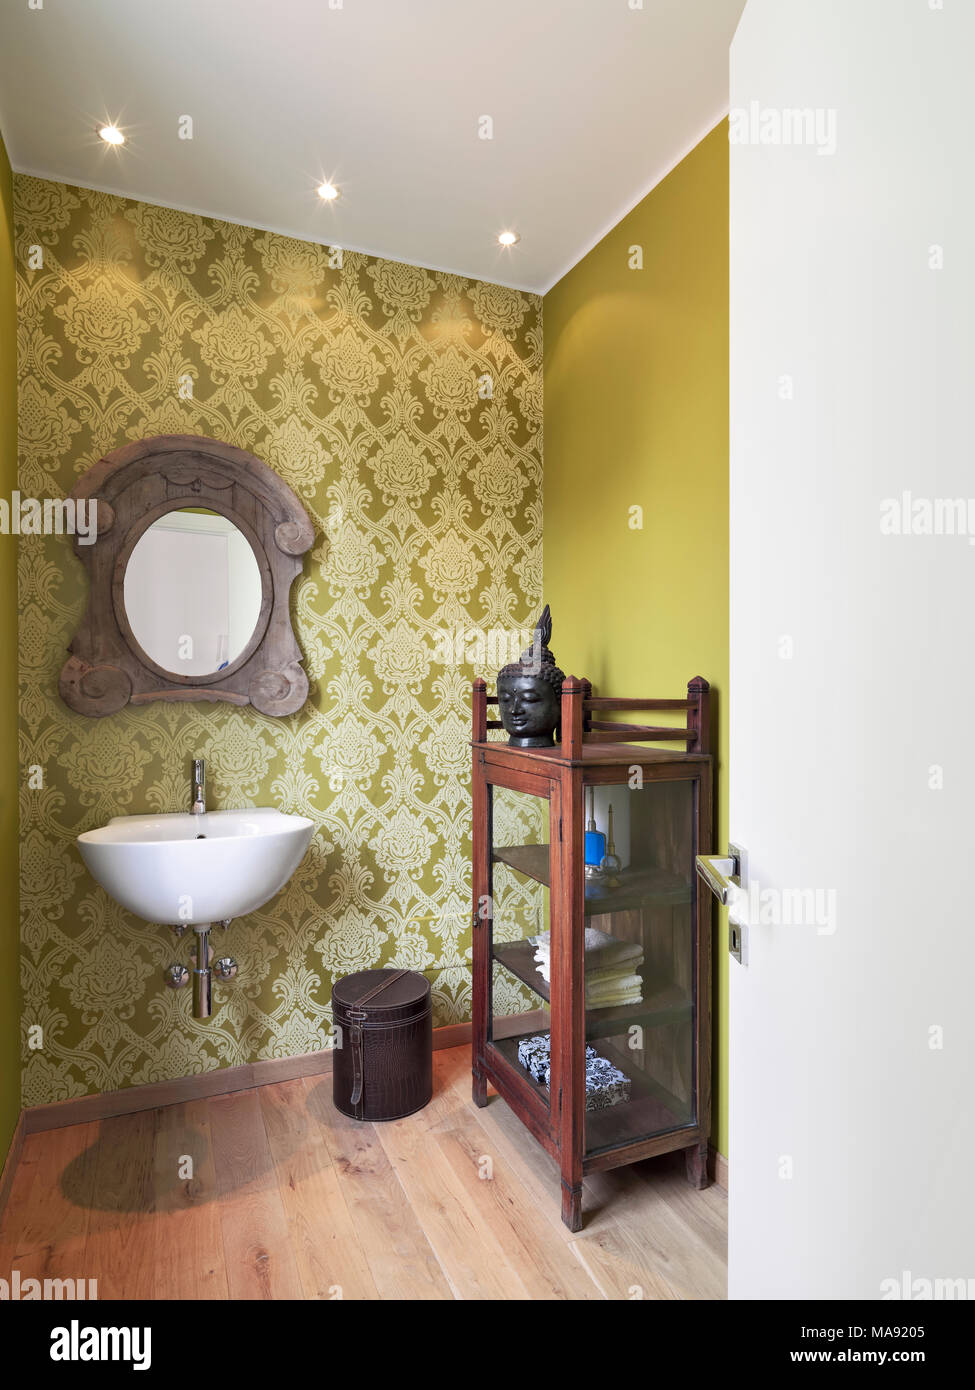 interiors shots of a bathroom with the wall-mounted washbasin the wallpaper and the green wall the floor is made of wood Stock Photo